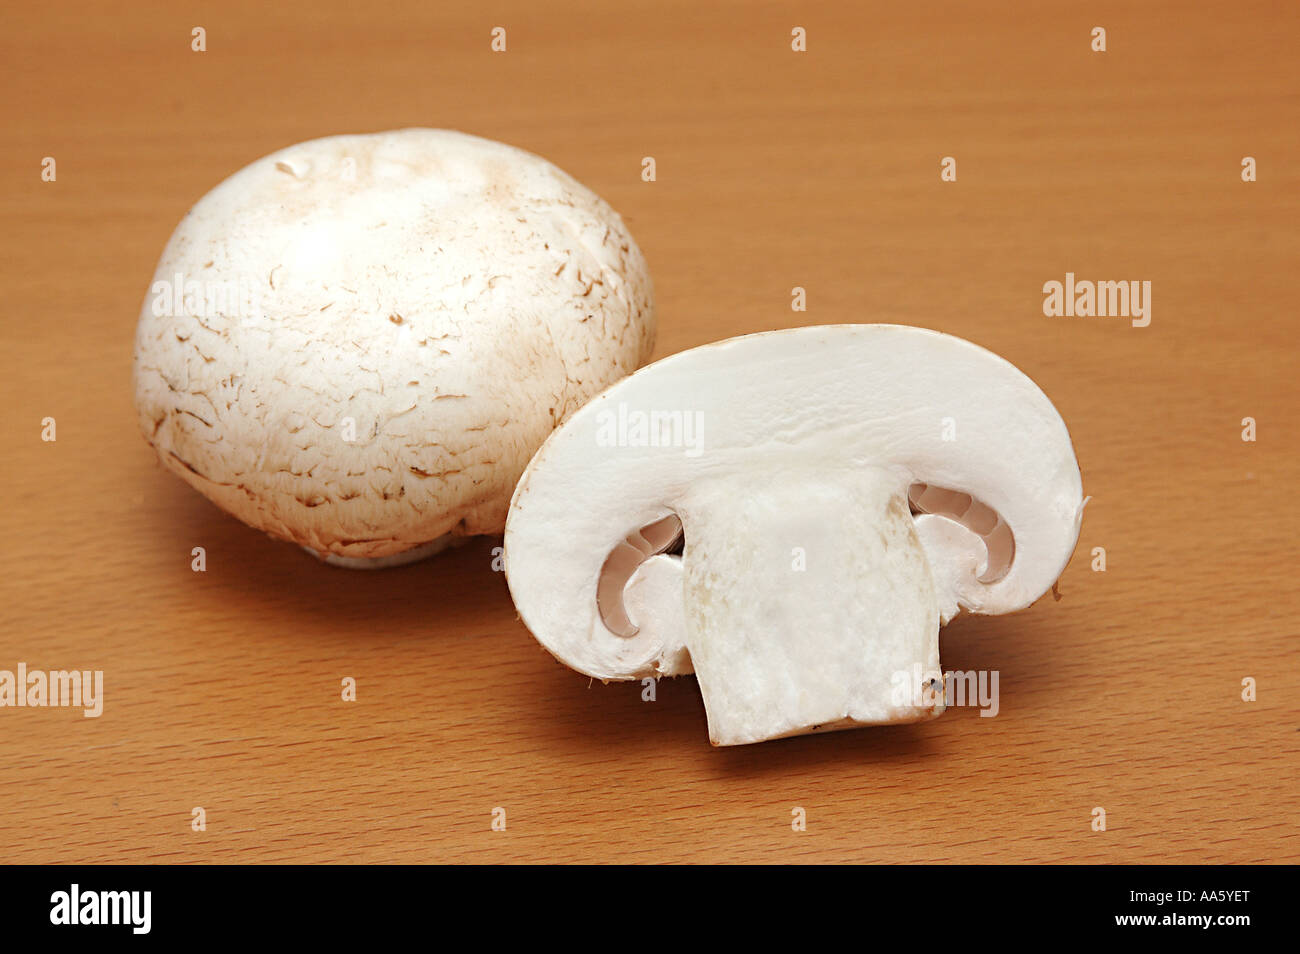 Vegetable white button mushroom cut and chopped shape one full and one half tabletop studio stilllife food Stock Photo